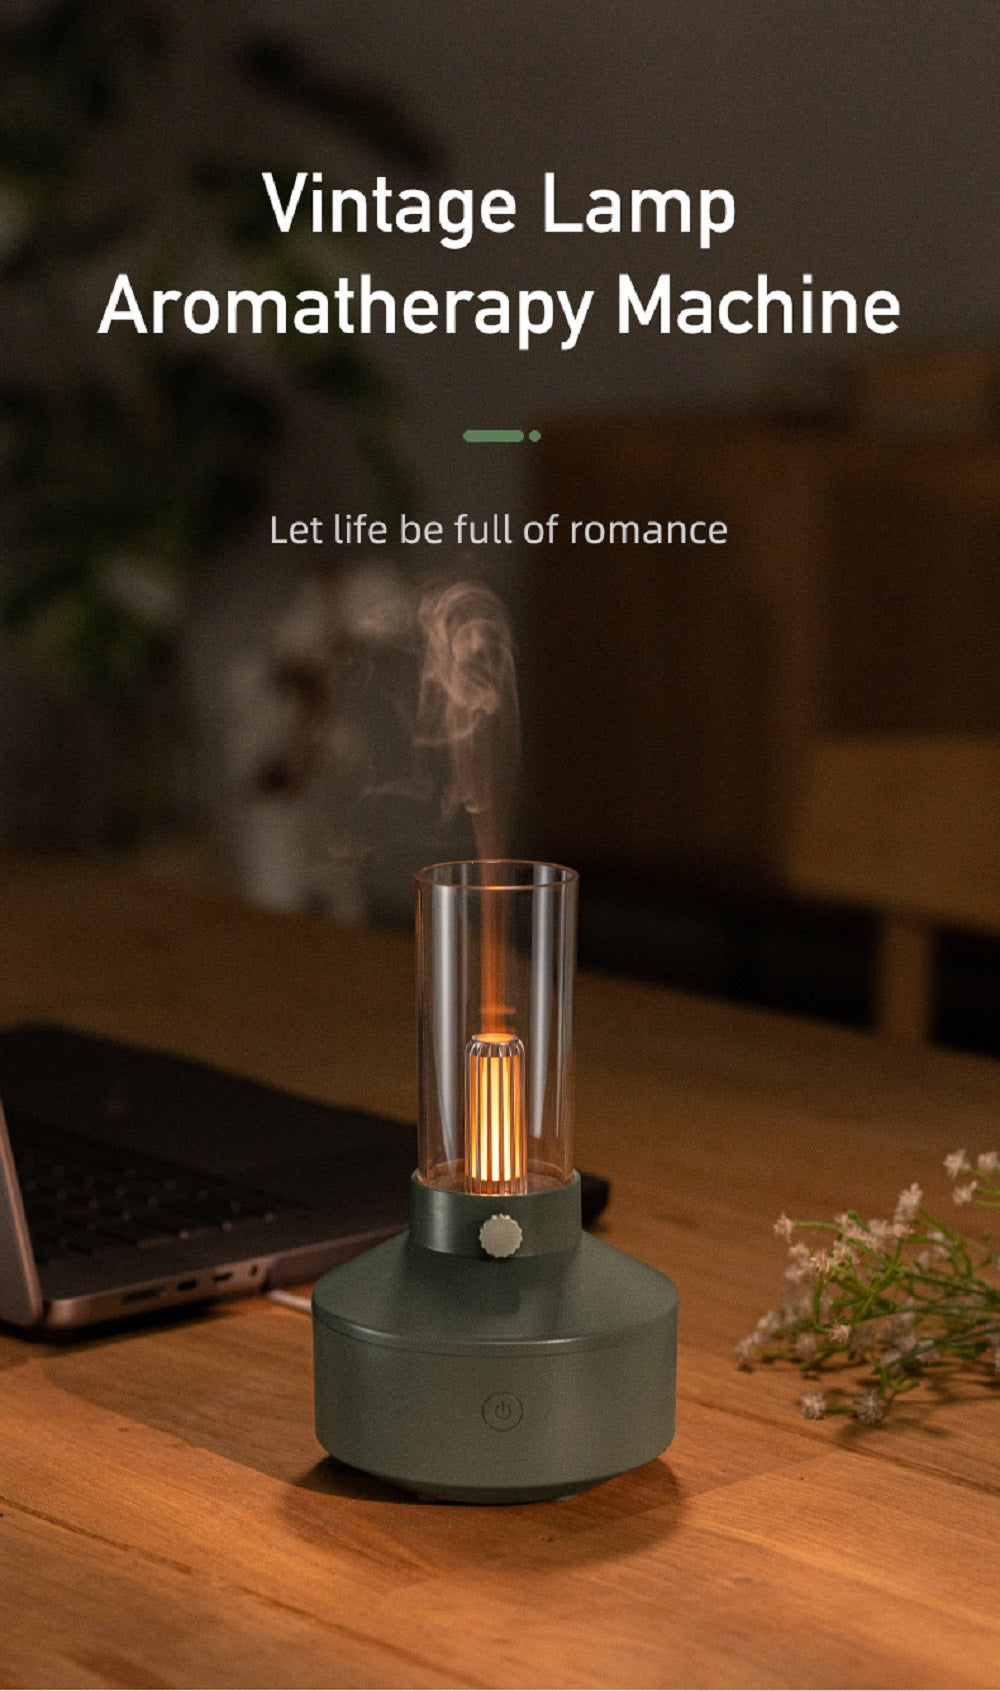 PickMeYA Candlelight Aroma Diffuser Portable Essential Oil Diffuser Noiseless USB Plug-in Desktop ambience Candlelight Home Aroma Diffuser Humidifier